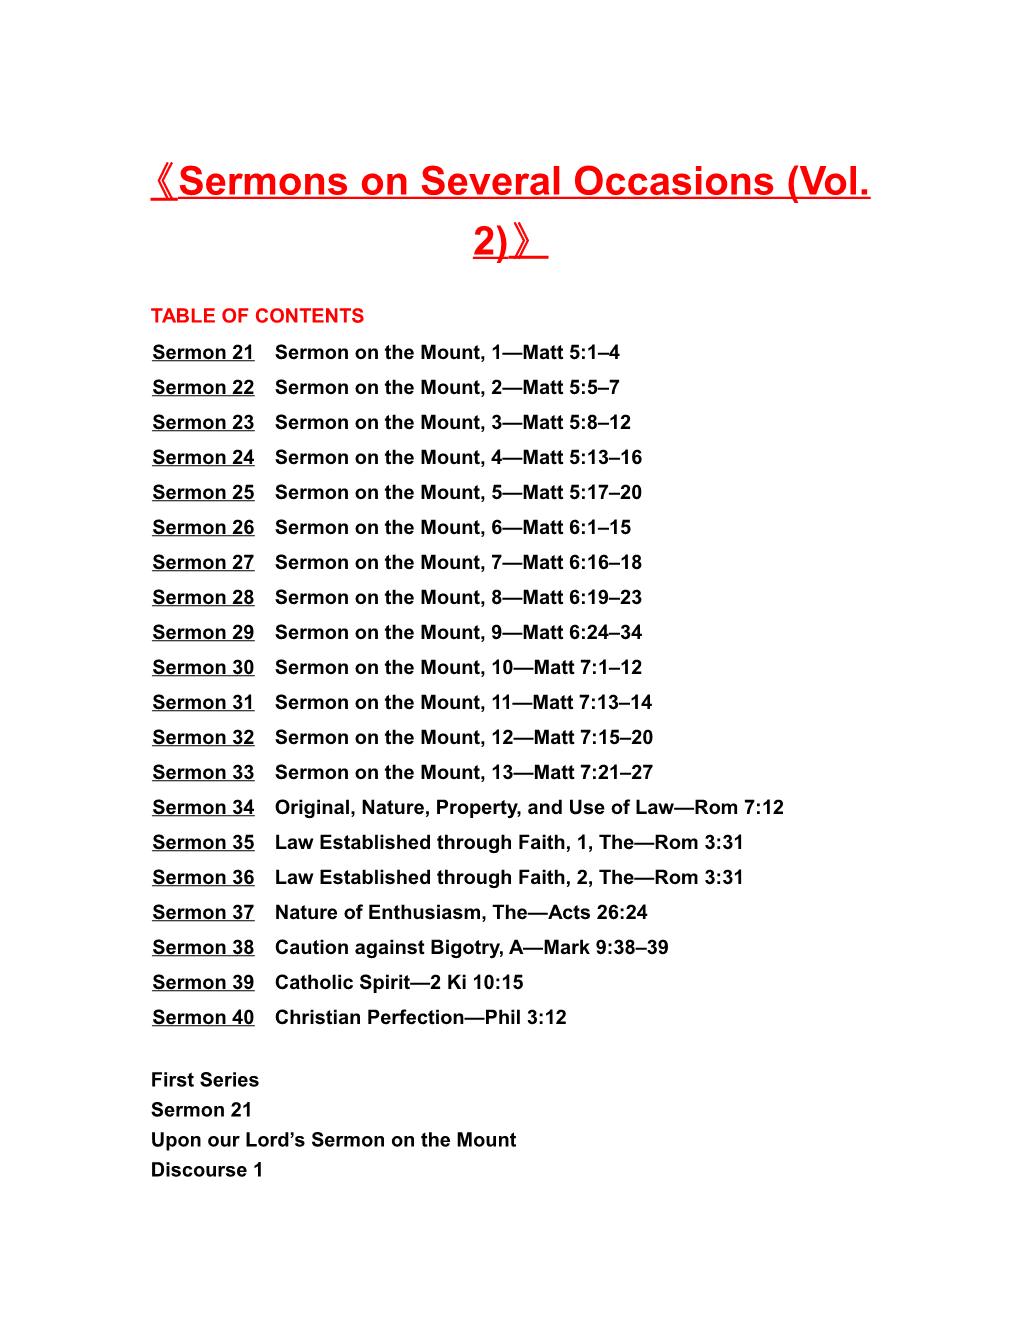 Sermons on Several Occasions (Vol. 2)